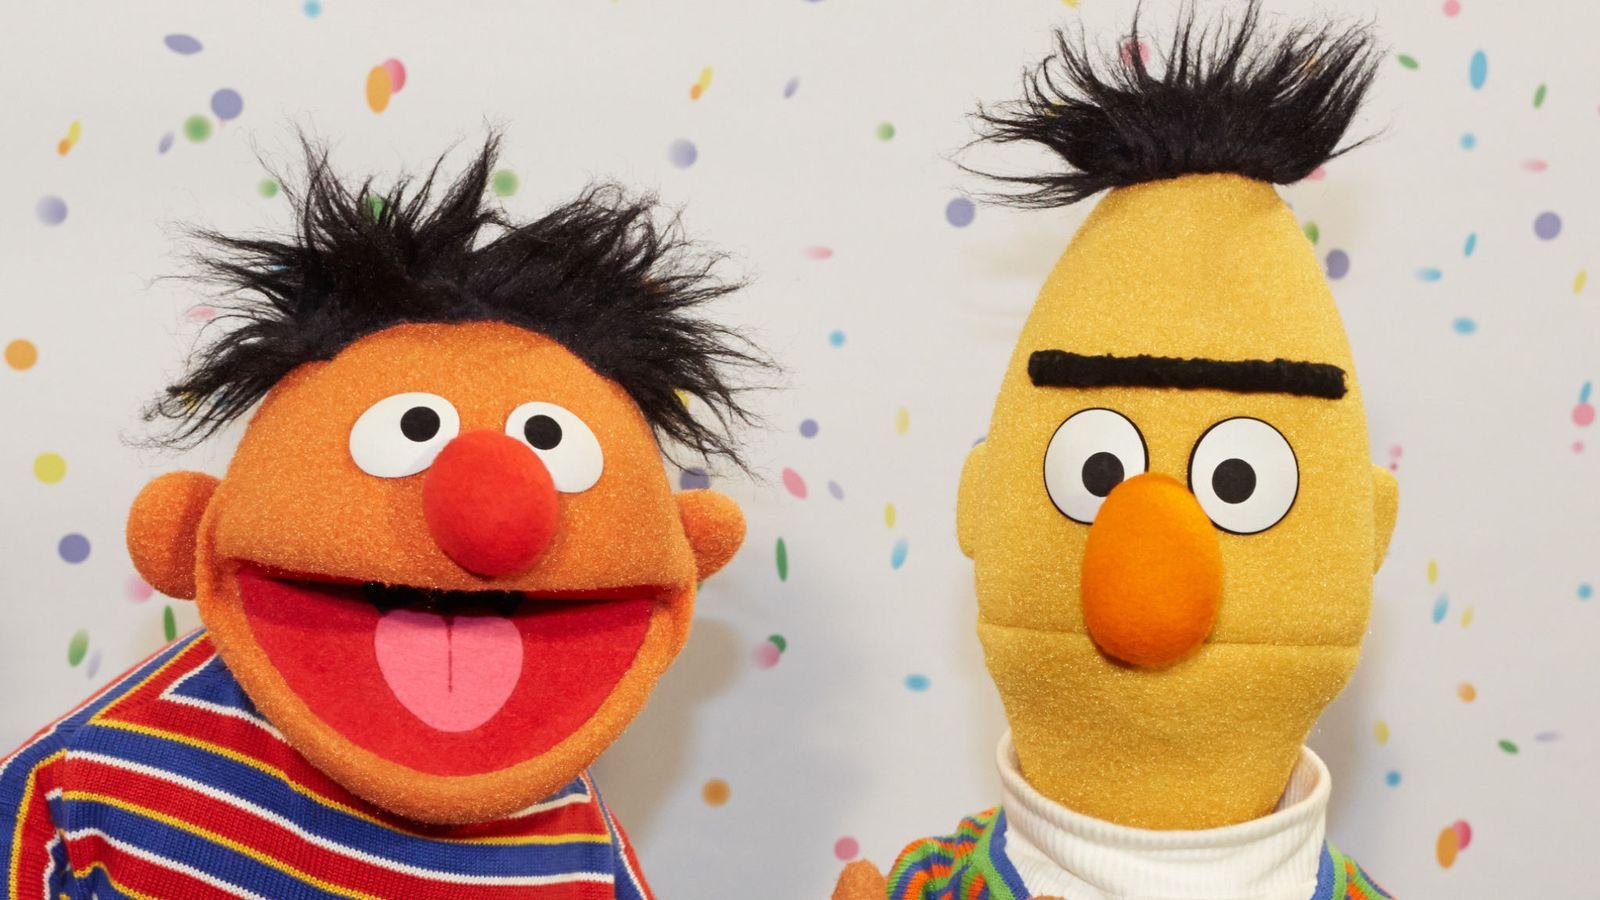 Bert and Ernie are not gay, says Sesame Street organisation as